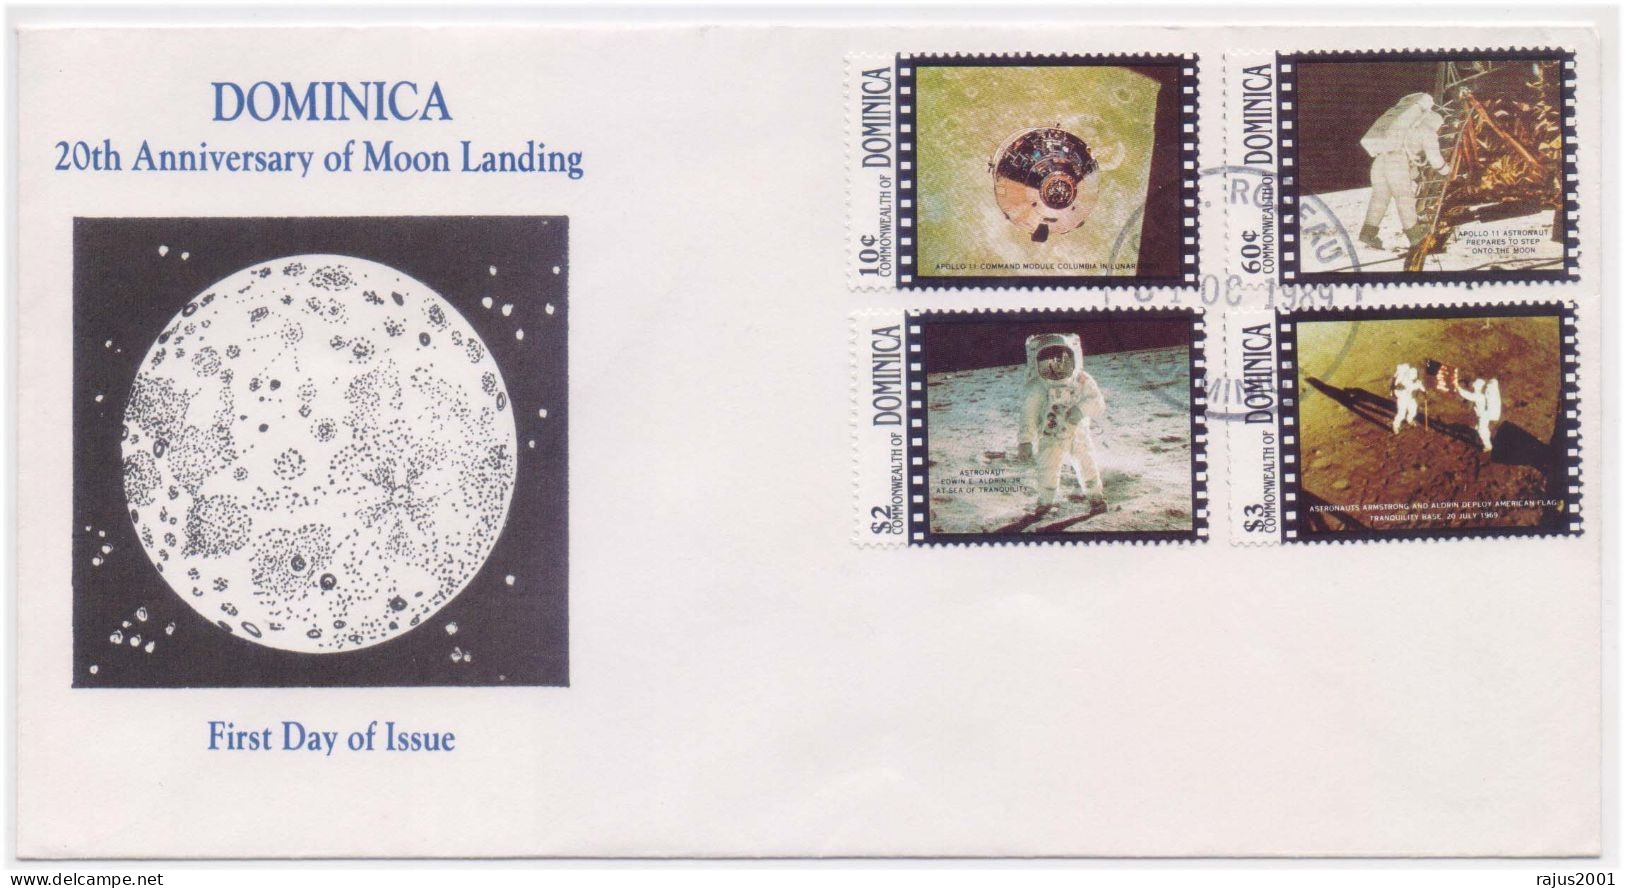 NASA  Apollo II Mission, Module Columbia, Lunar Module Eagle First Landing On The Moon, Space, Science, Astronomy FDC - Sterrenkunde